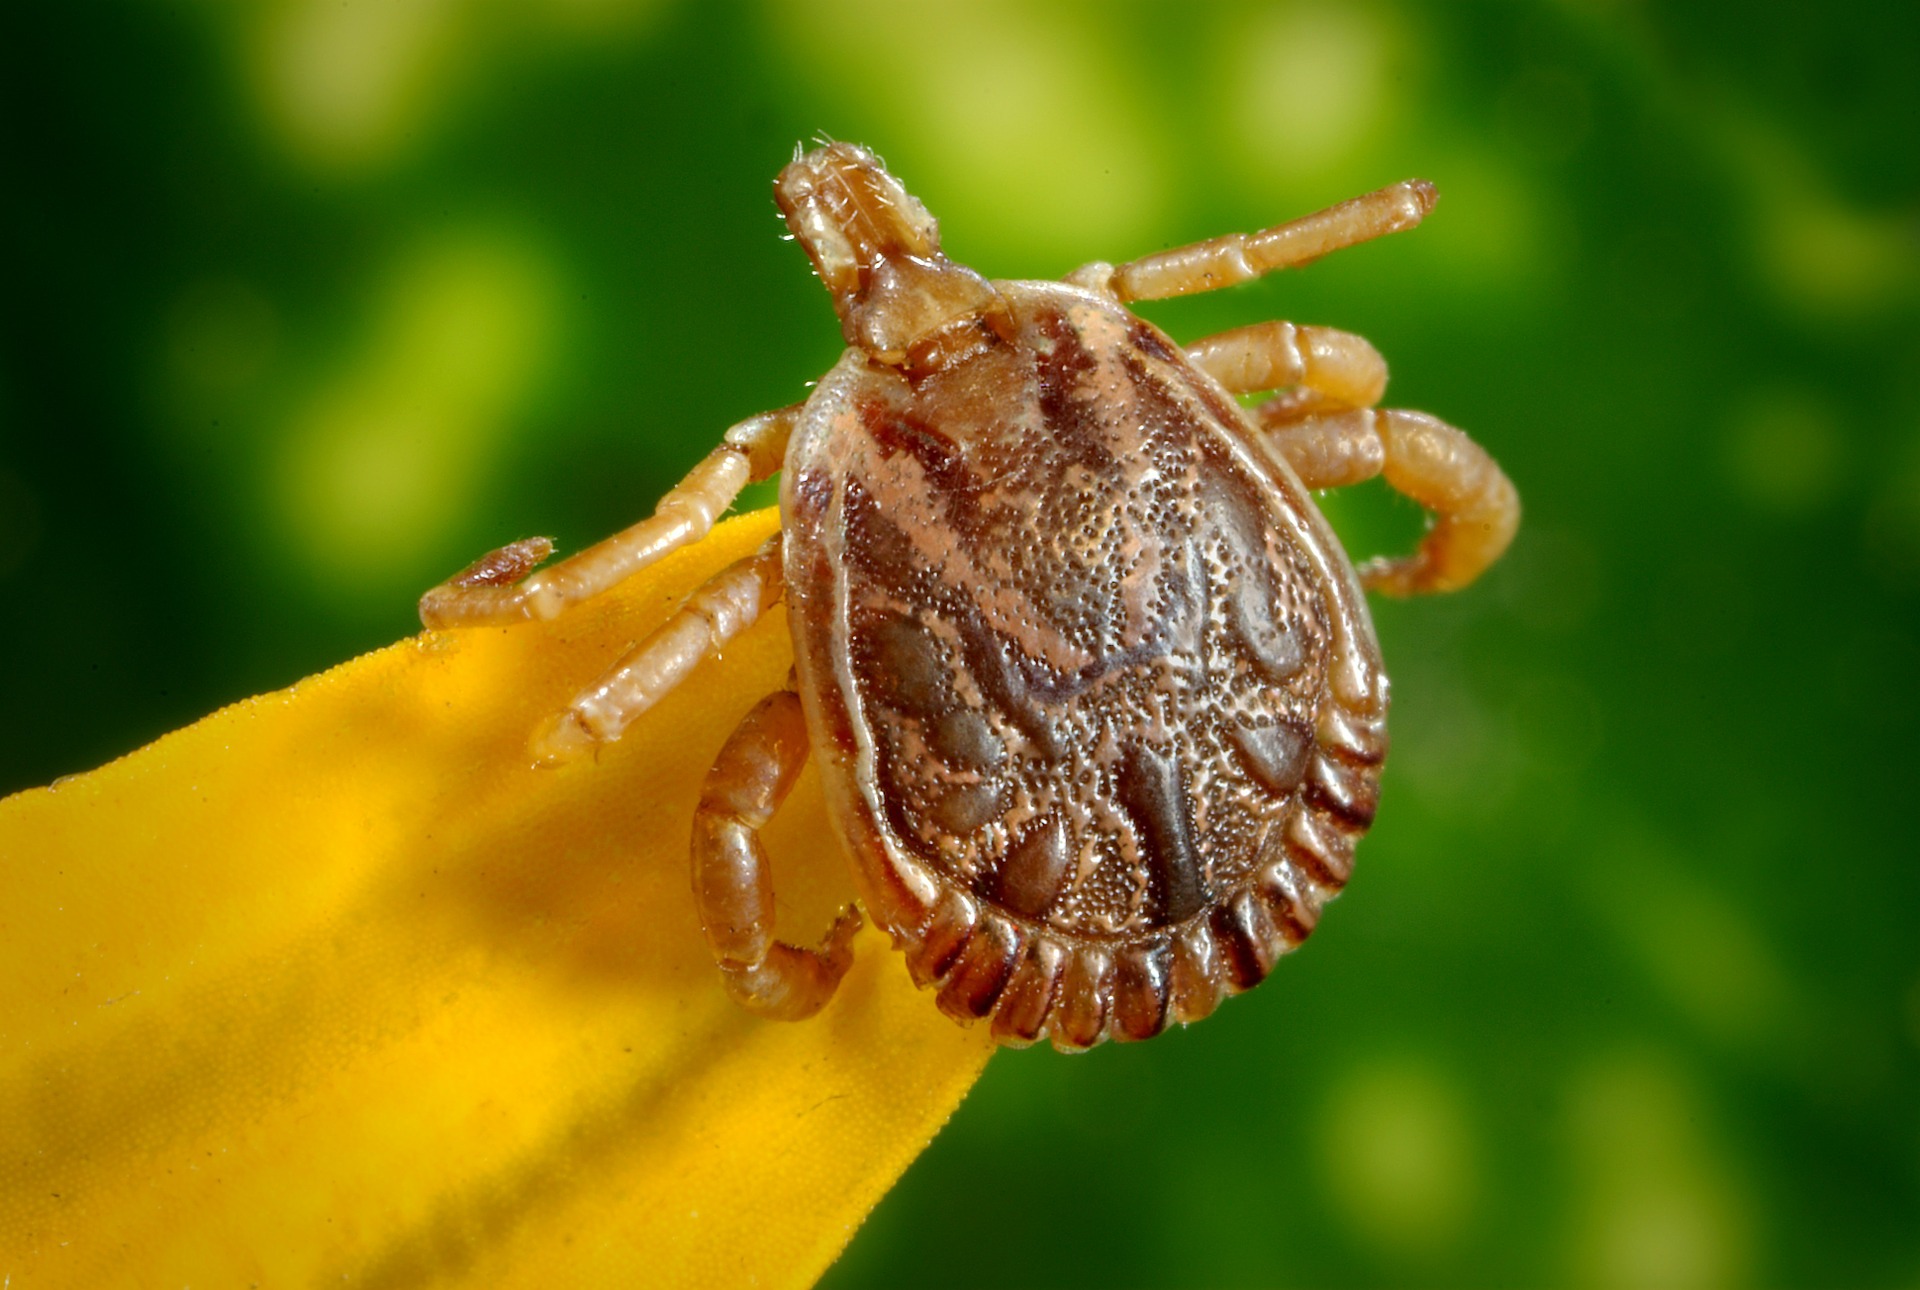 Ehrlichiosis: The Tick-Borne Disease You Haven’t Heard About